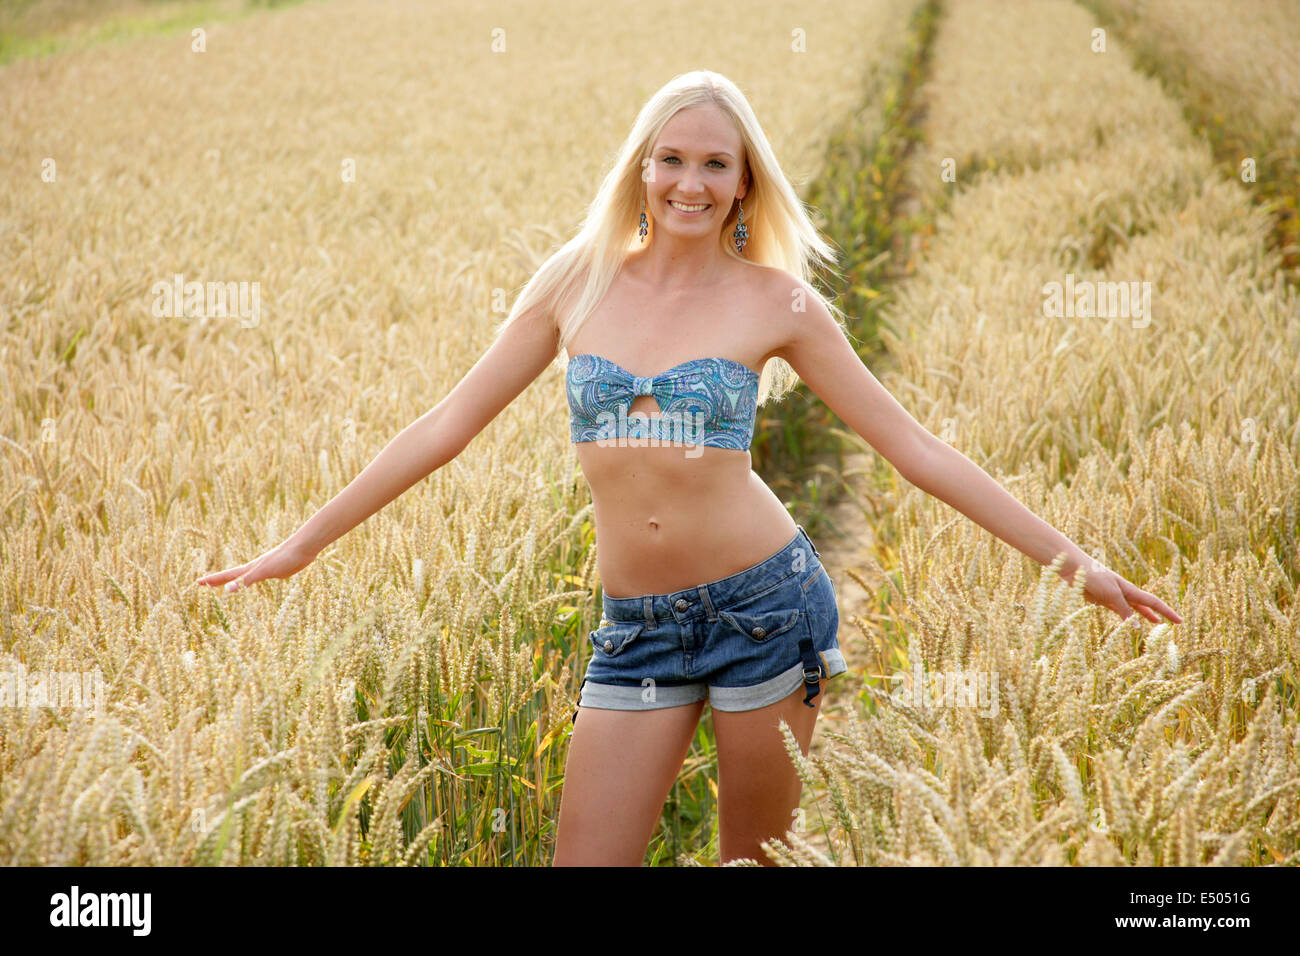 young slender woman in corn field Stock Photo